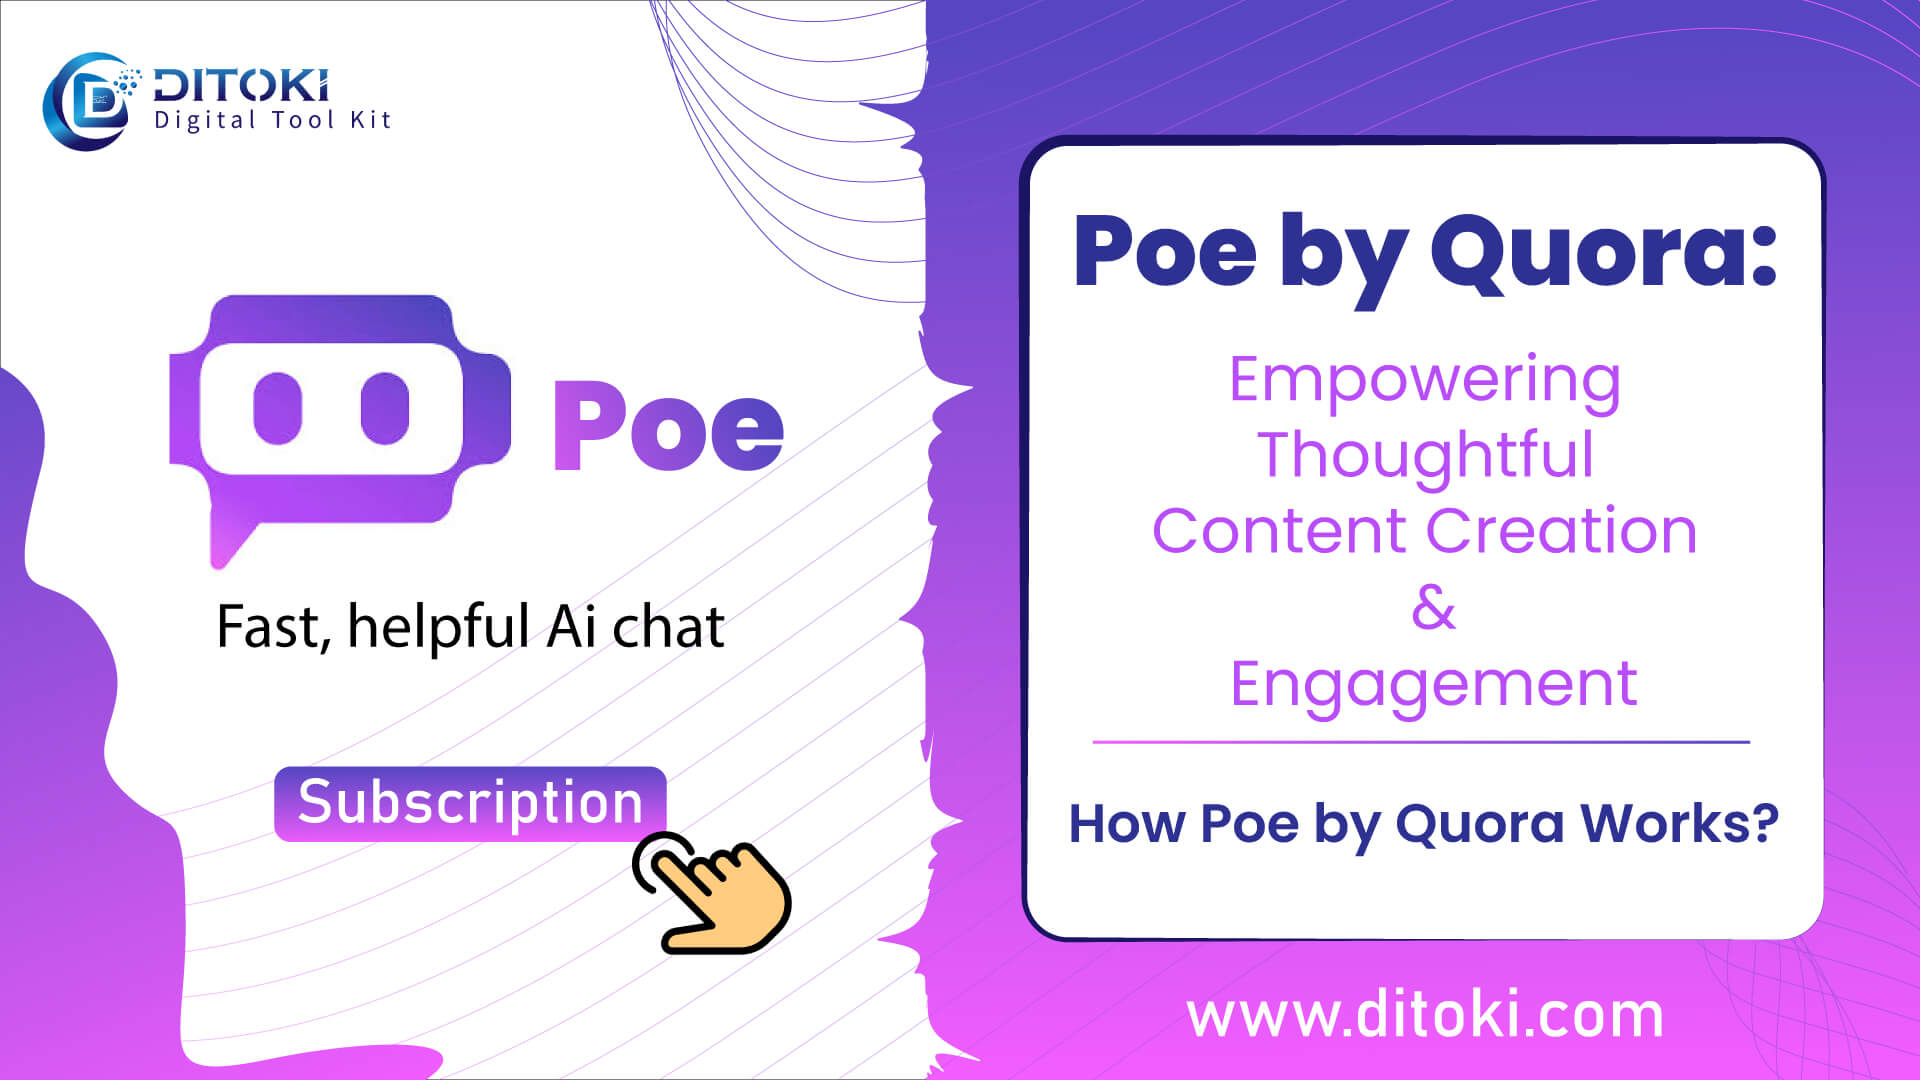 Poe by Quora Empowering Thoughtful Content Creation and Engagement